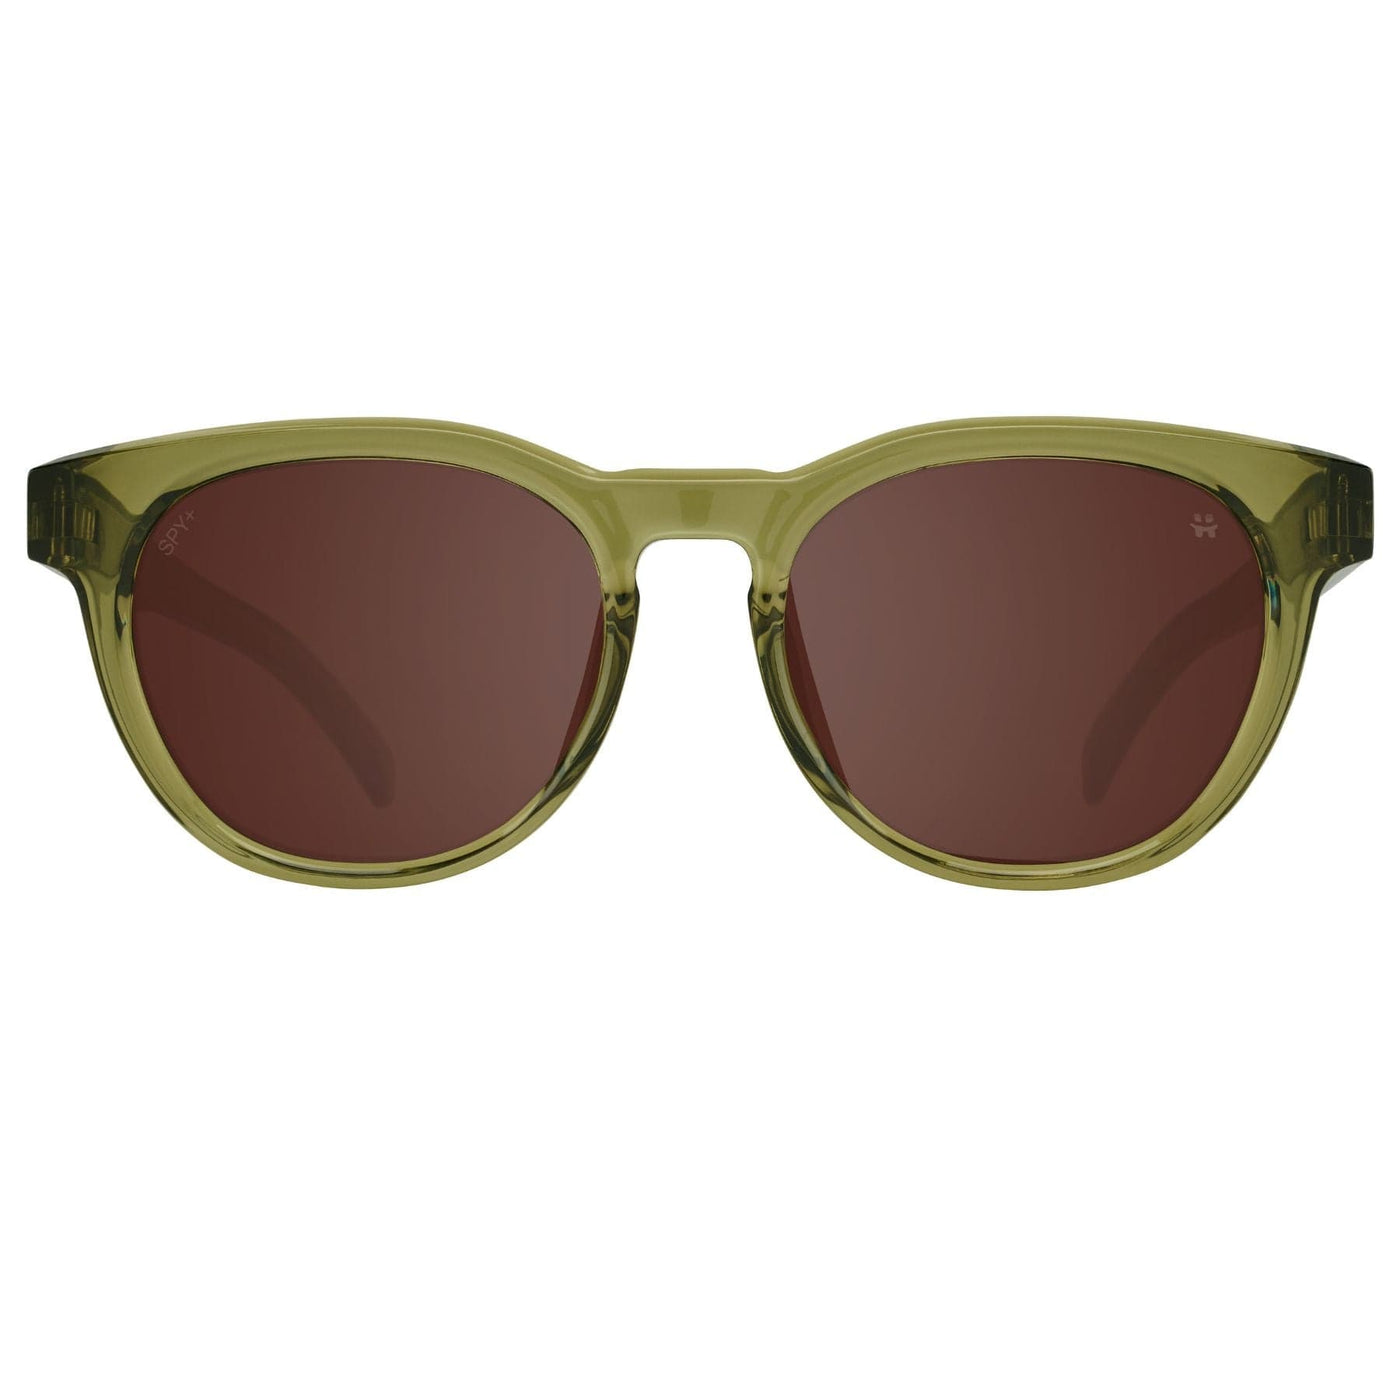 SPY CEDROS Polarized Sunglasses, Happy Lens - Brown 8Lines Shop - Fast Shipping